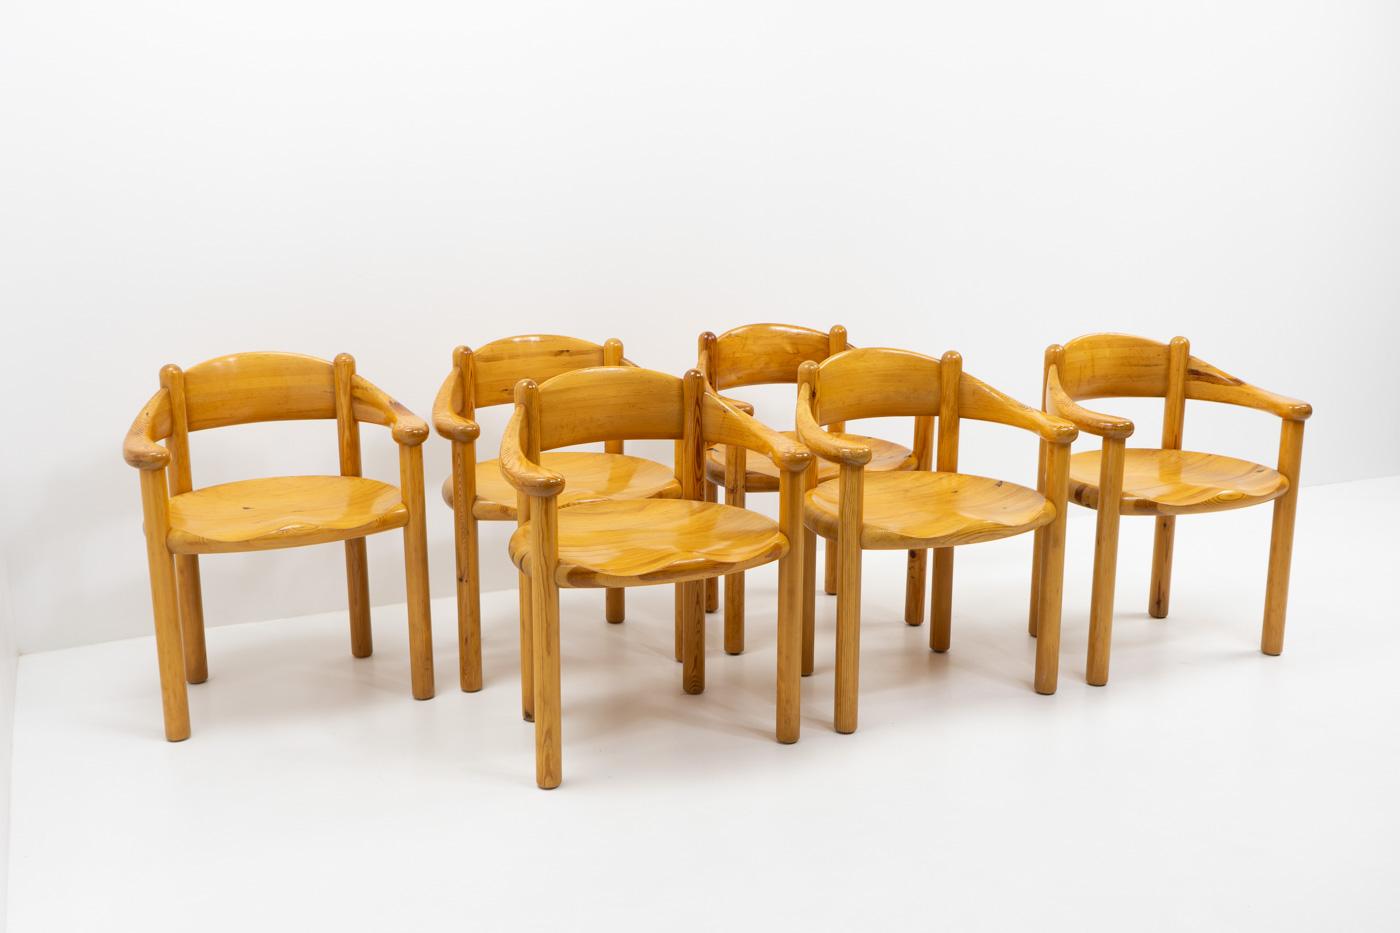 Six armchairs in pinewood by the Danish architect Rainer Daumiller, produced by Hirtshals Sawmill during the late 1970s.

Constructed in solid wood and with round curves, these chairs are actually quite comfortable to sit in. The chairs have